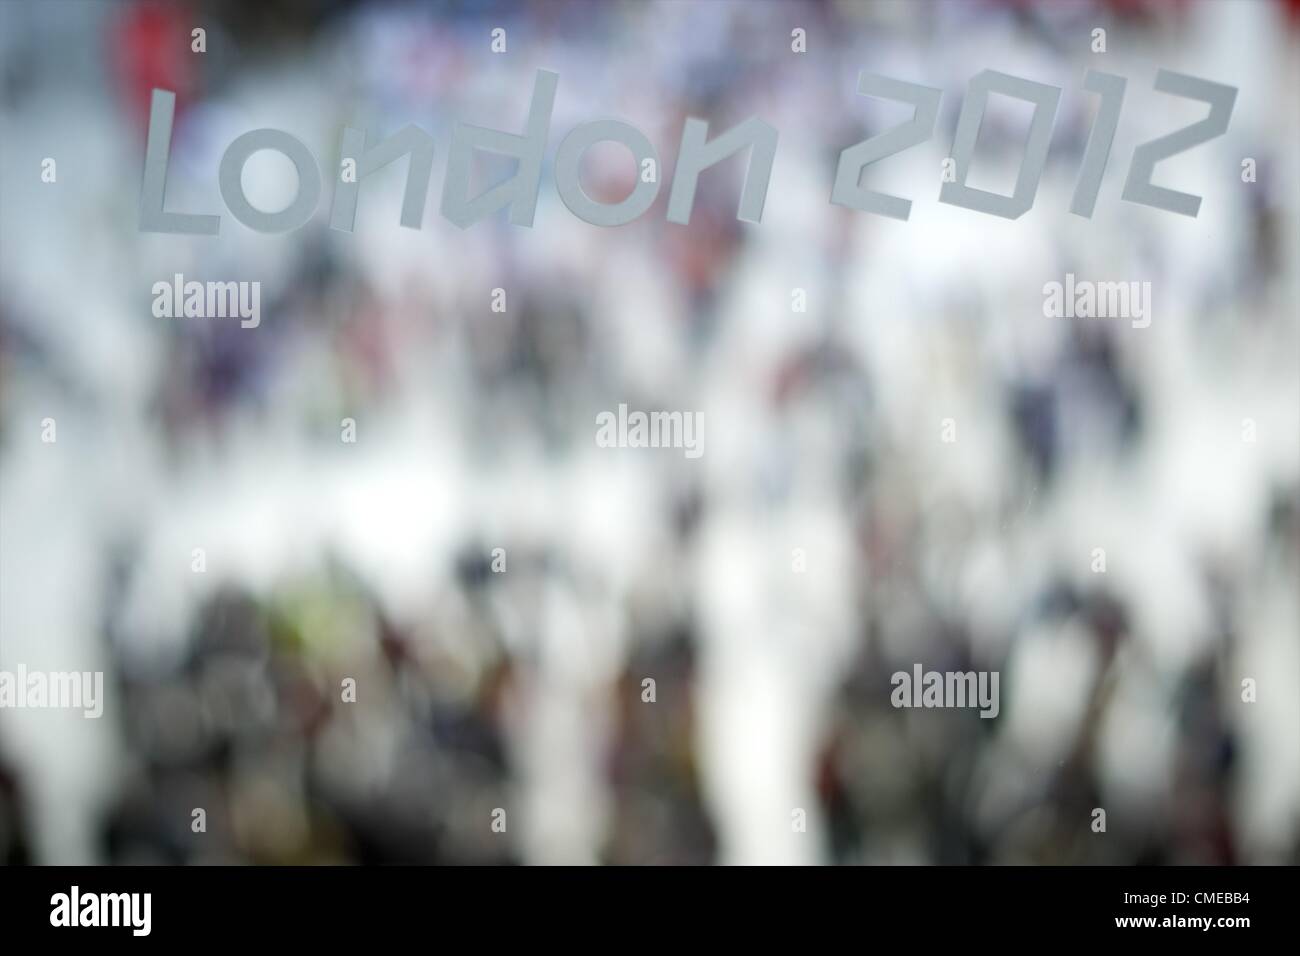 July 29, 2012 - London, England, United Kingdom - Crowds pass through the ExCel London Exhibition Centre on the third day of the 2012 London Summer Olympics. (Credit Image: © Mark Makela/ZUMAPRESS.com) Stock Photo